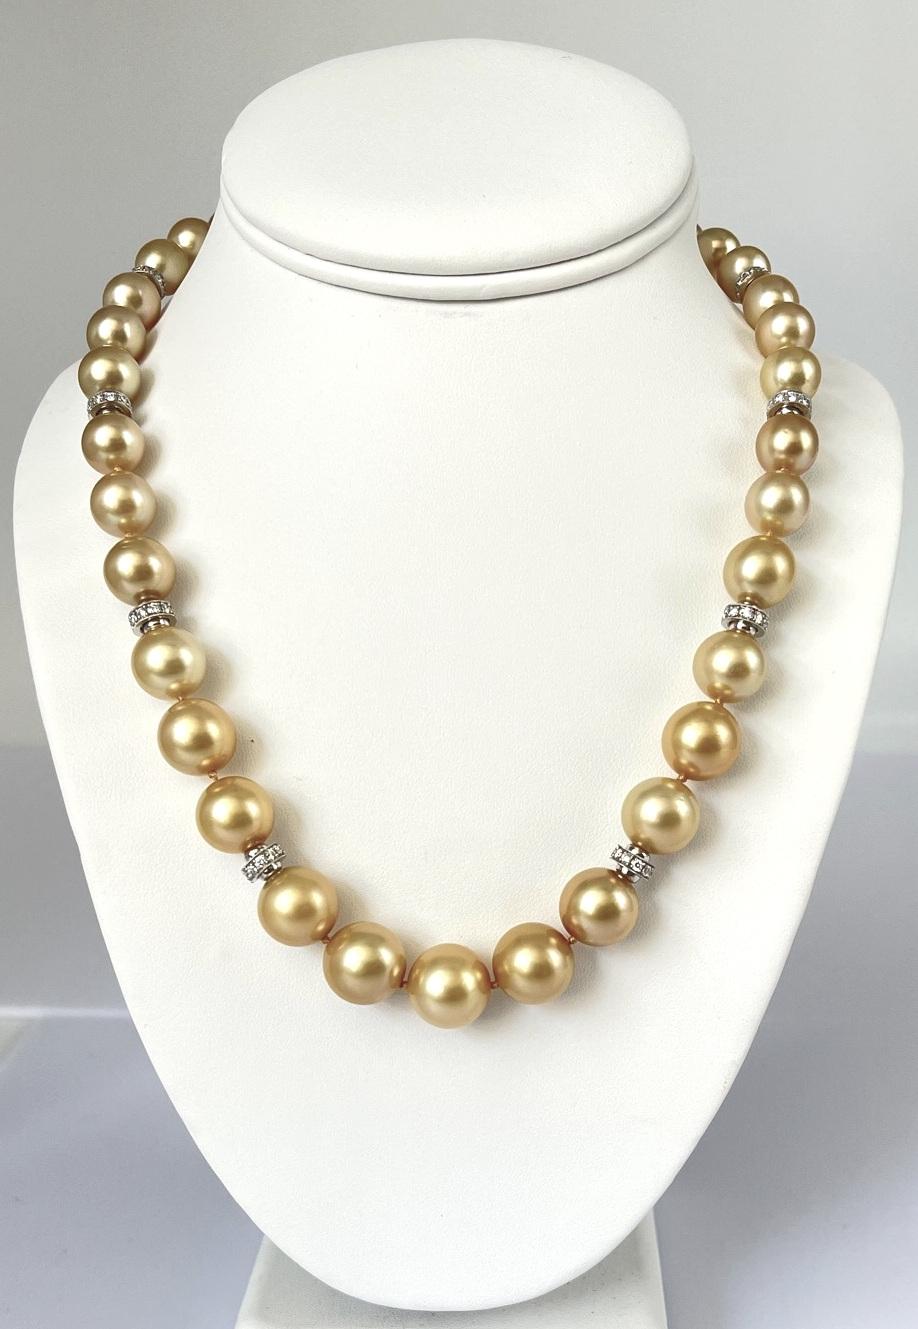 Golden South Sea Pearl Necklace, 18 Inches with 14k and 18k Accents, 9.6 - 13mm For Sale 1